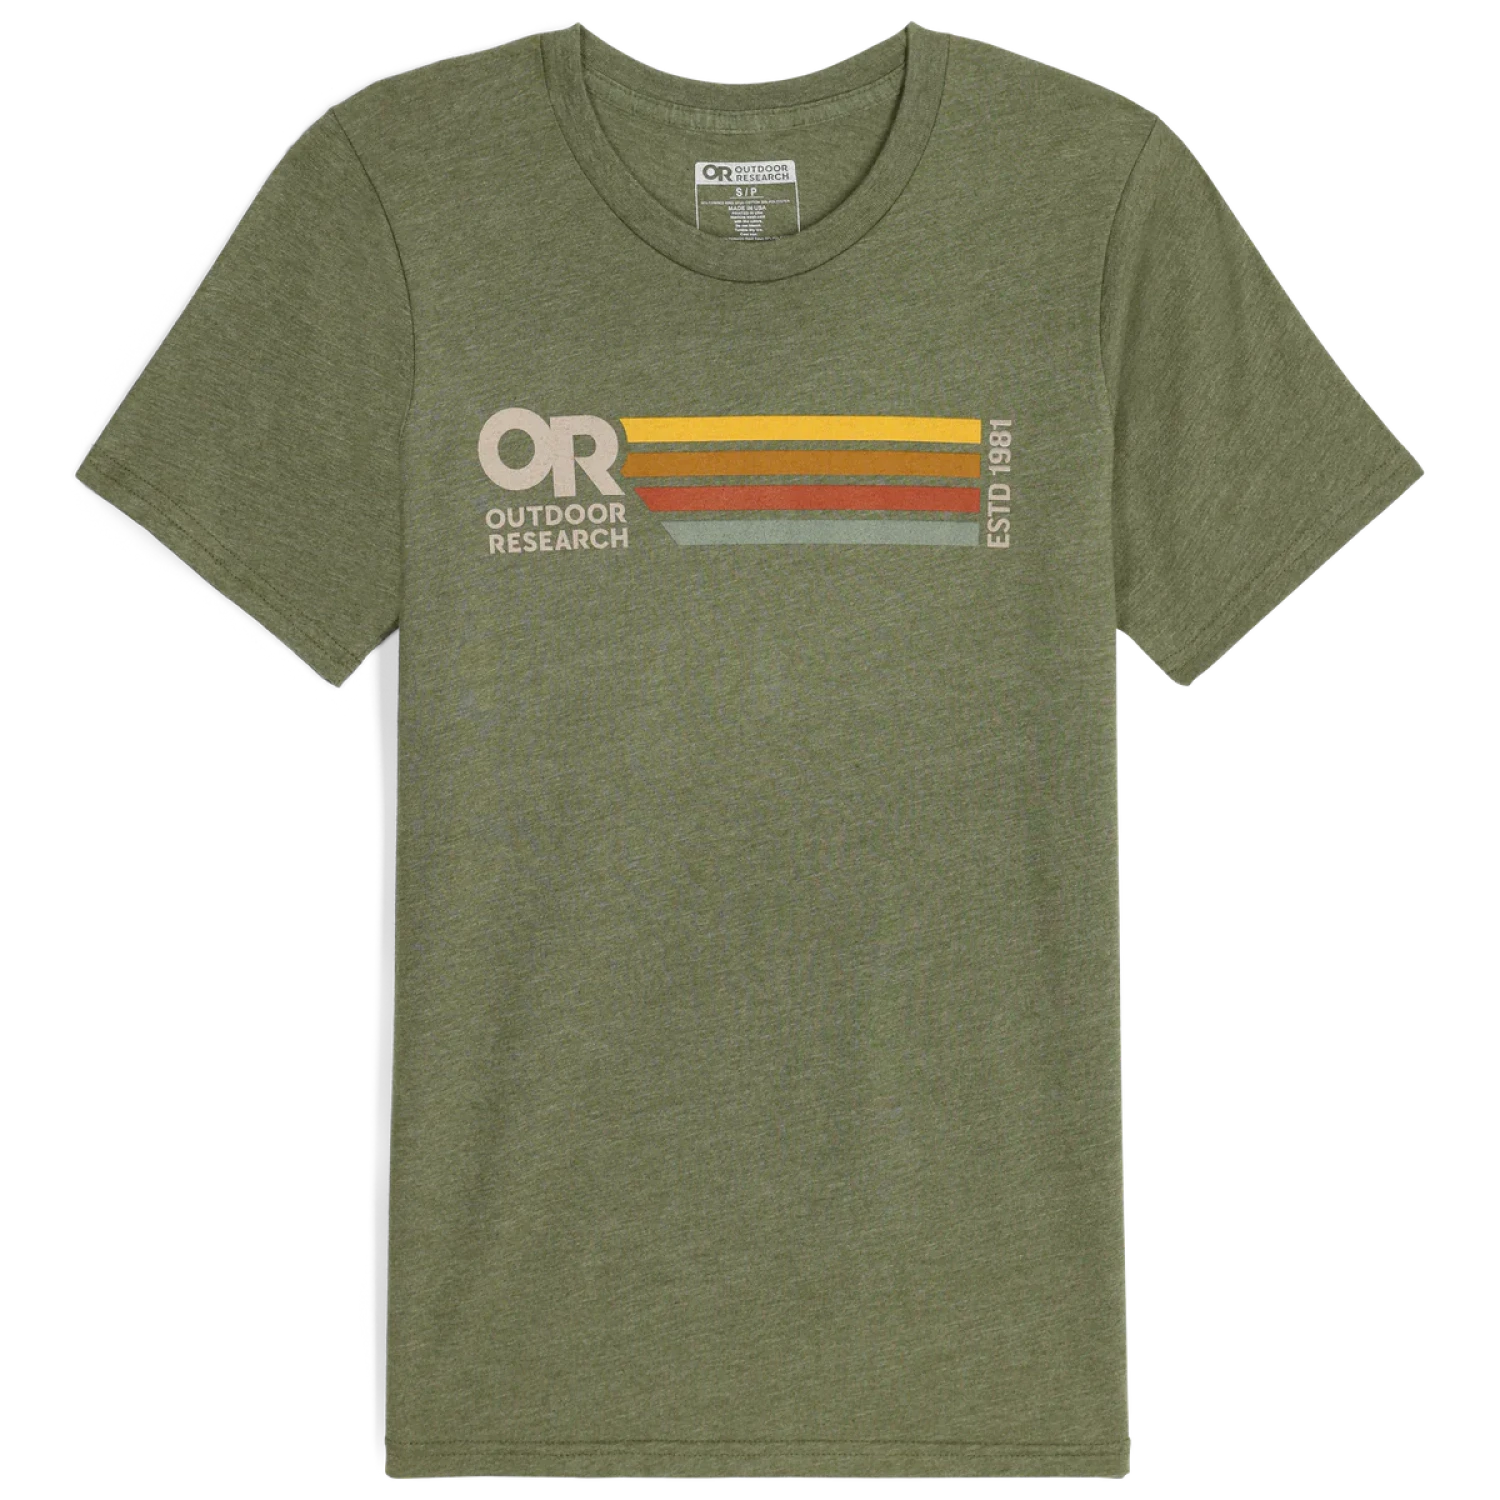 Outdoor Research Quadrise Senior Logo T-Shirt shown in the Grove color option. Flat, front view.